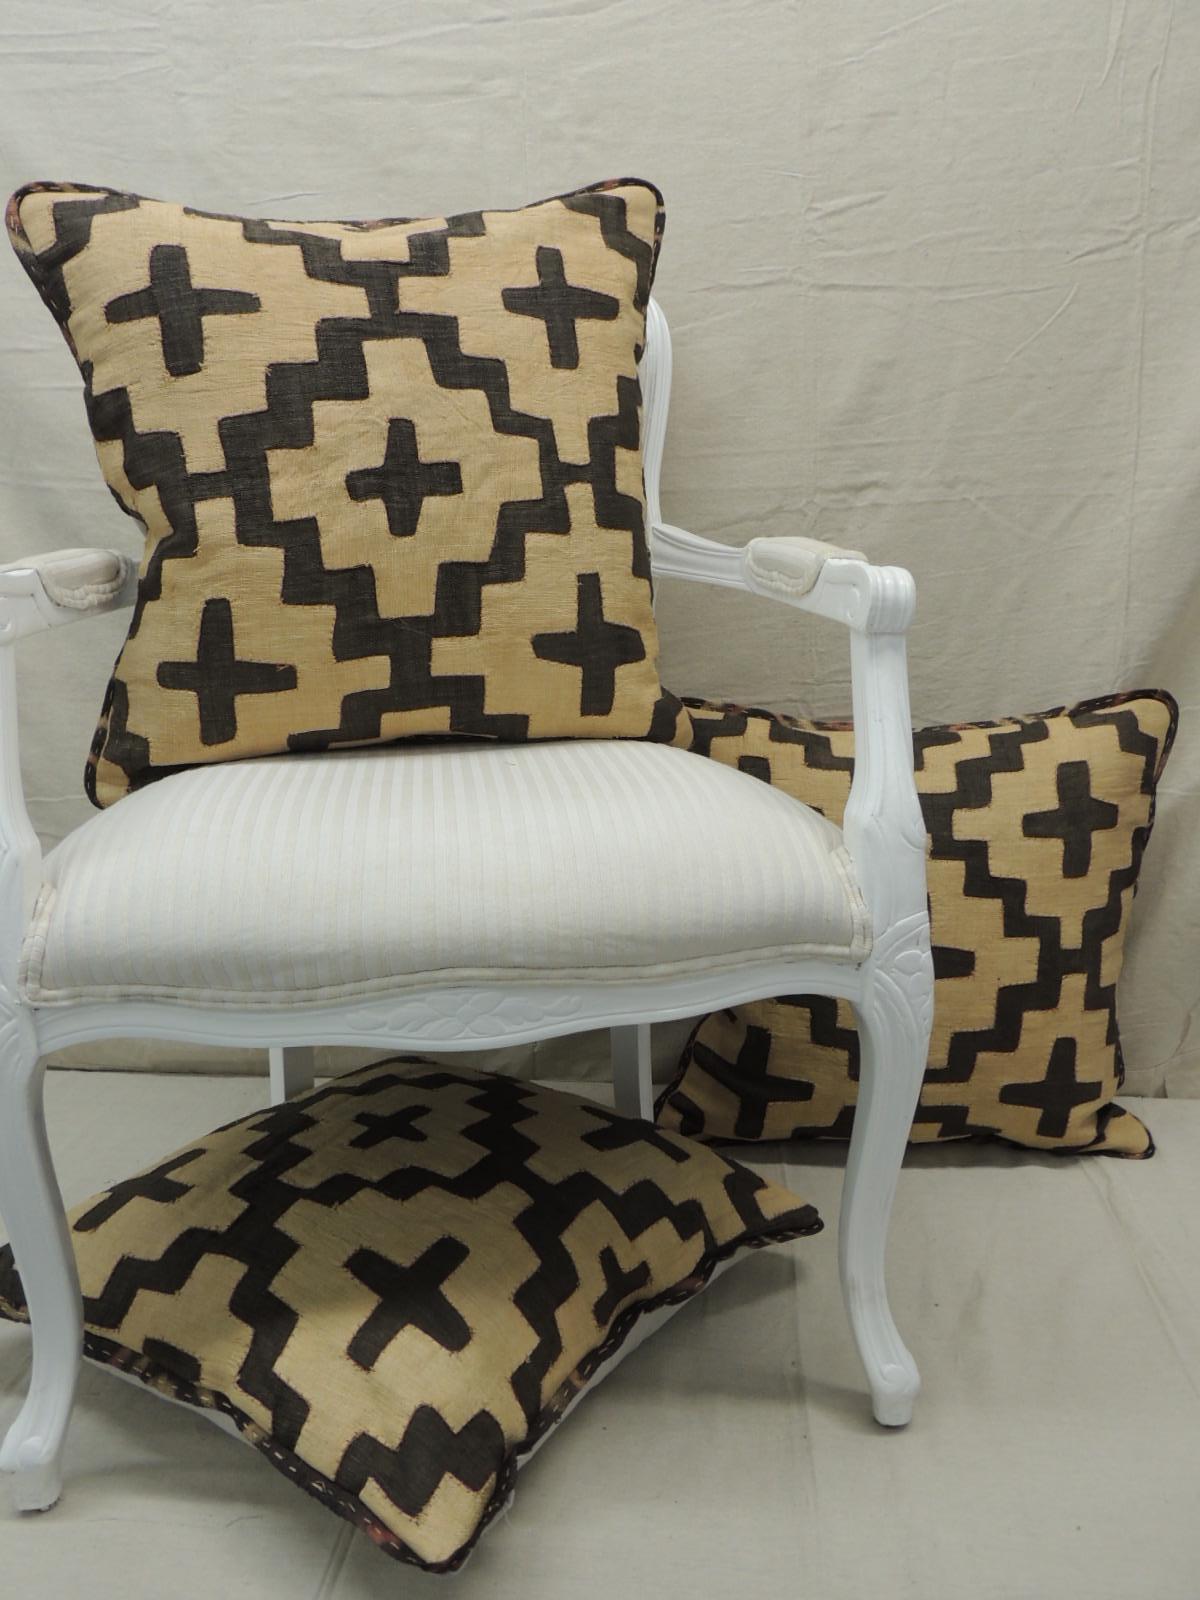 Hand-Crafted Vintage Kuba Tan and Black Handwoven Patchwork African Decorative Pillow